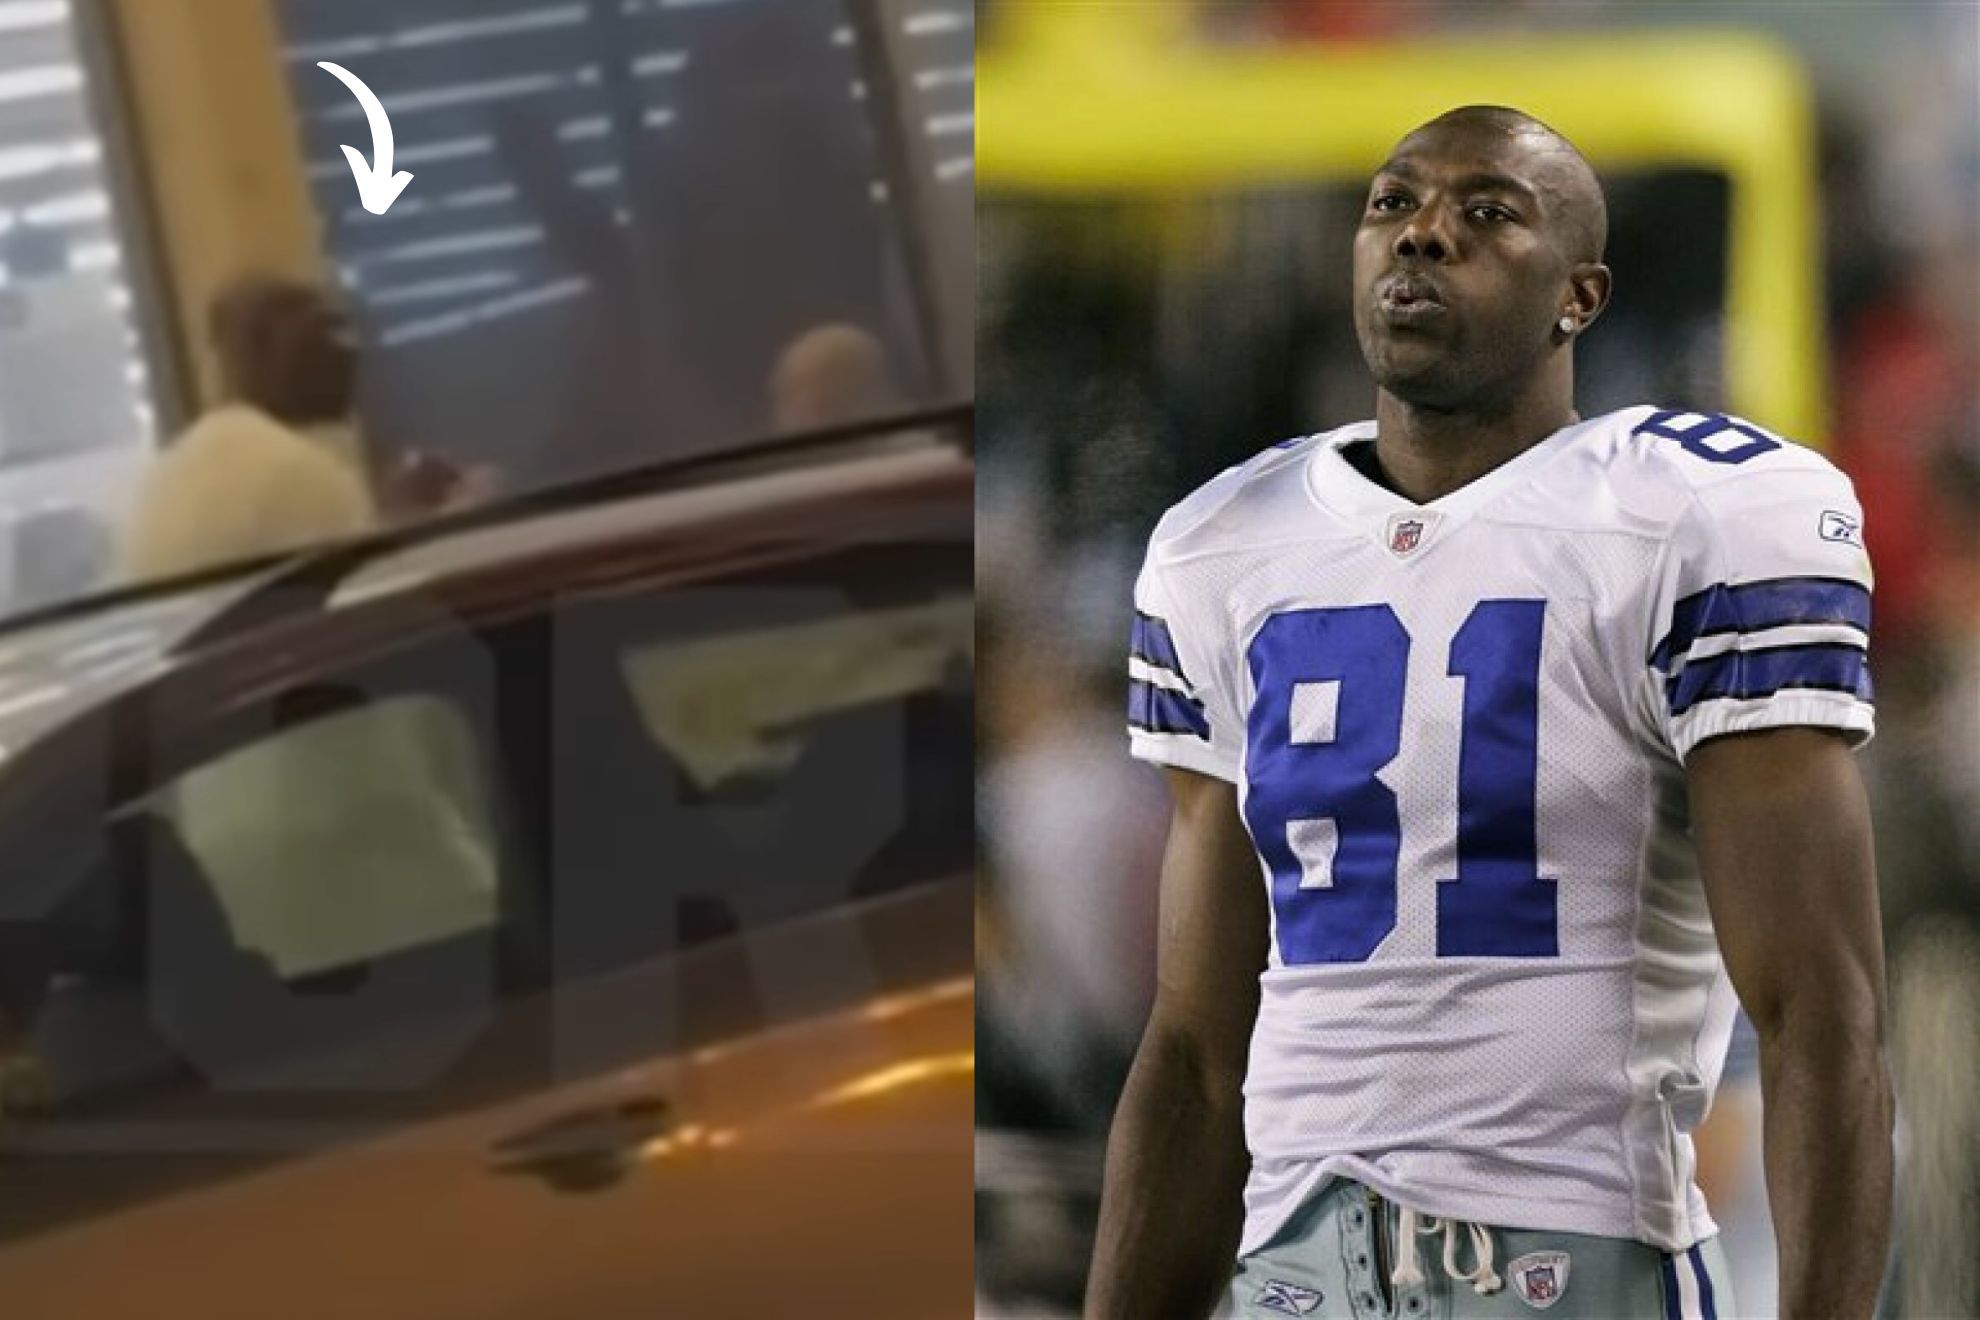 Terrell Owens got into a fist fight with a heckler in front of an LA CVS.